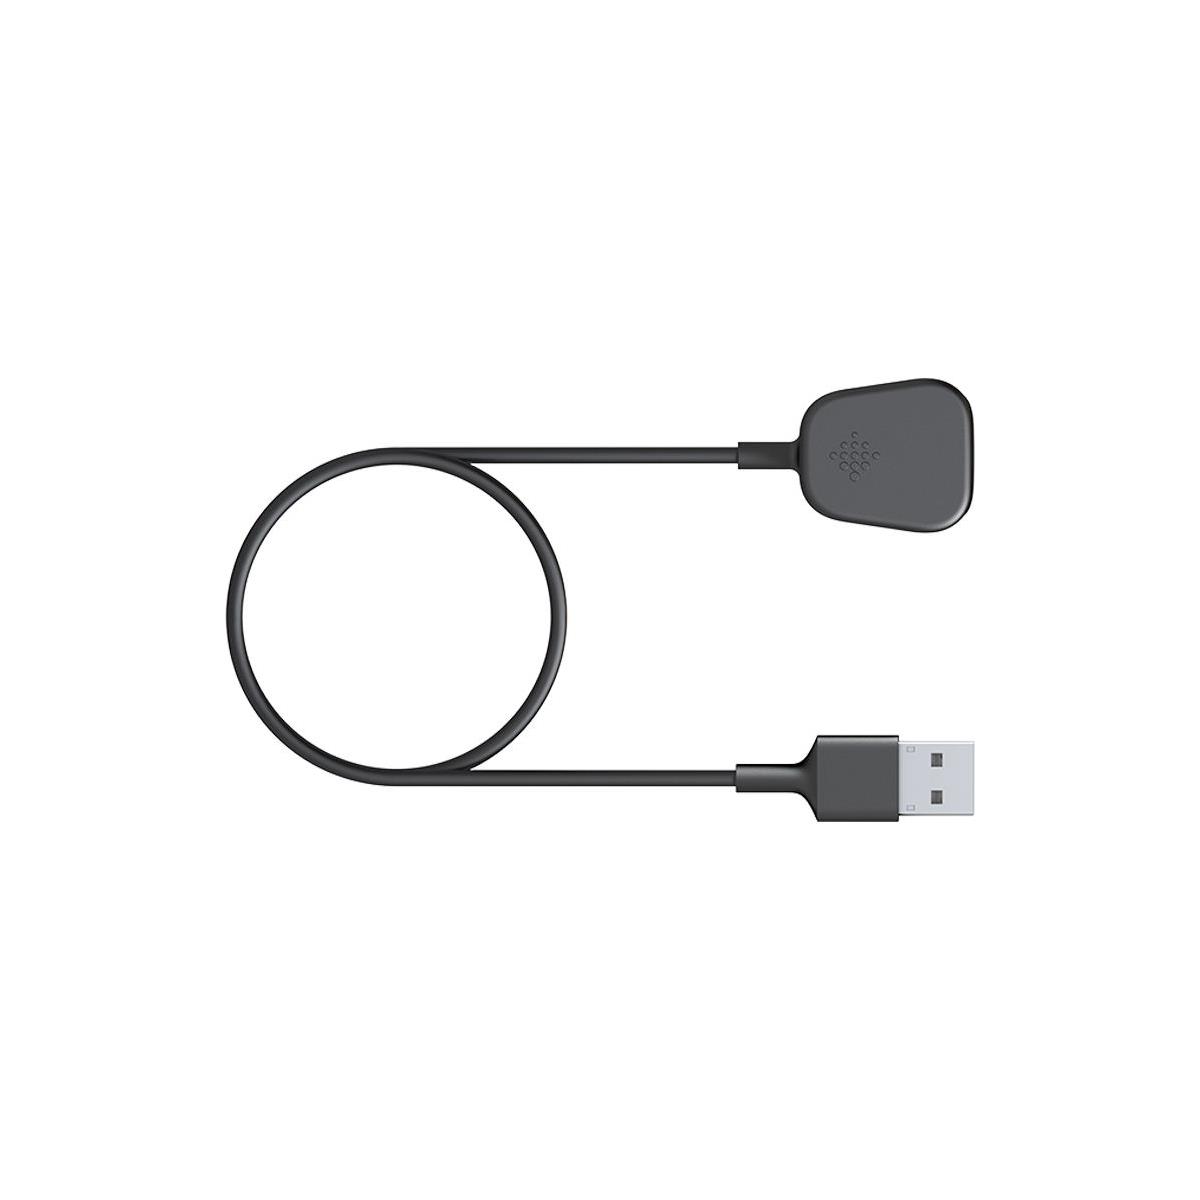 Image of Fitbit Charging Cable for Charge 3 Activity Tracker